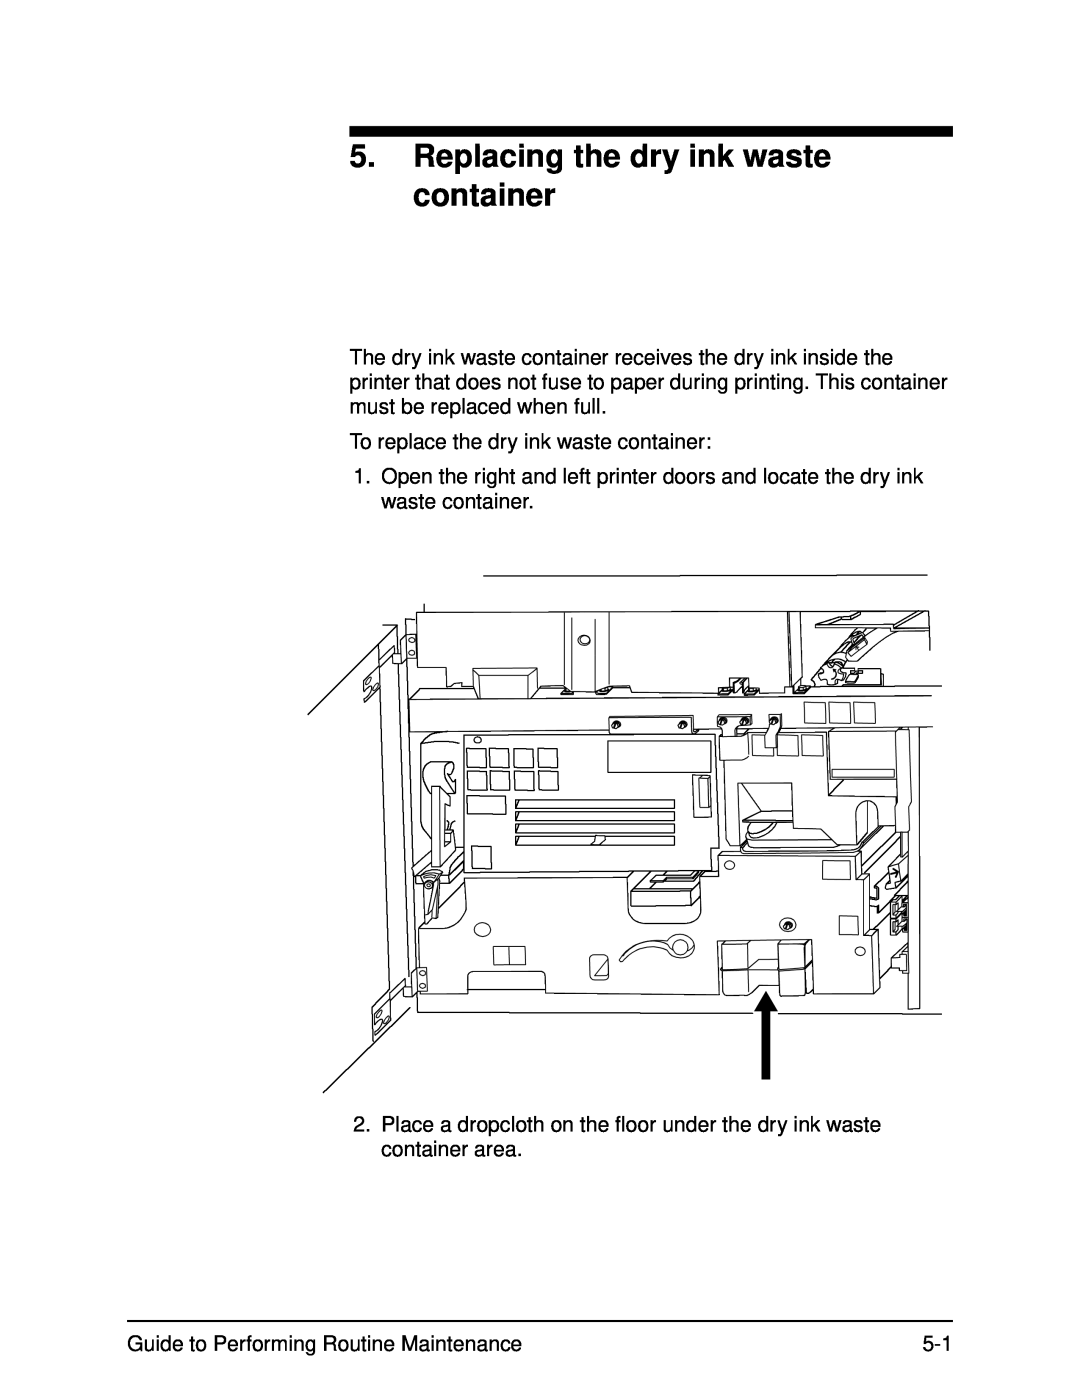 Xerox DocuPrint 96 manual Replacing the dry ink waste container 